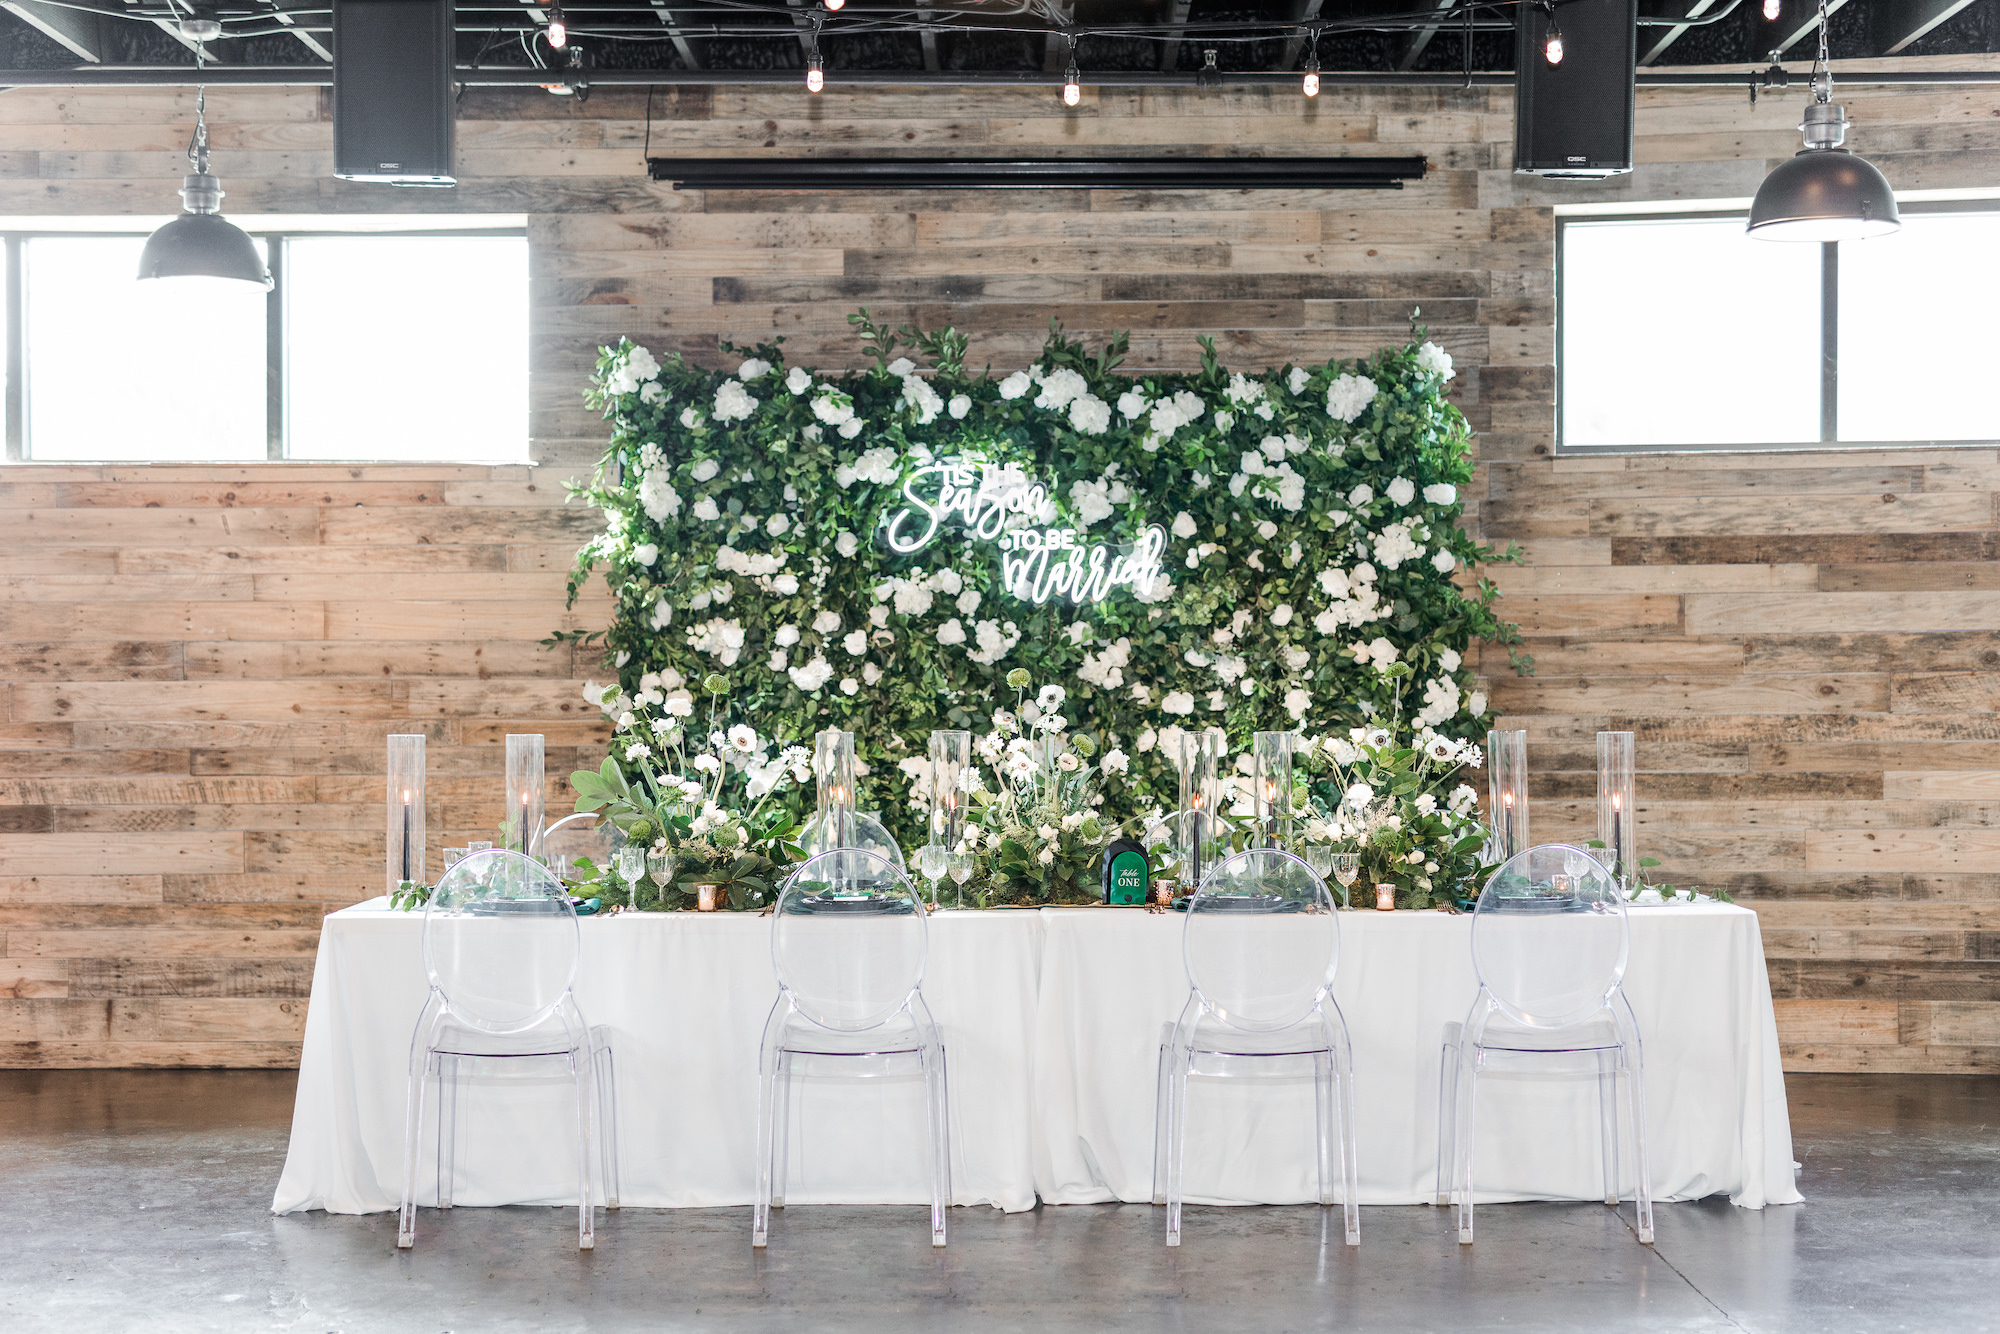 Winter Modern Whimsical Wedding Reception Decor, Long Feasting Table with White Linen, Acrylic Ghost Chairs, Tall Glass Cylinders with Black Candlesticks Greenery Wall with Lush White Roses, Hydrangeas and White "Tis the Season to Be Married" Neon Sign | Tampa Bay Wedding Planner MDP Events Planning | Madeira Beach Industrial Wedding Venue The West Events | Furniture and Linen Rentals Gabro Event Services